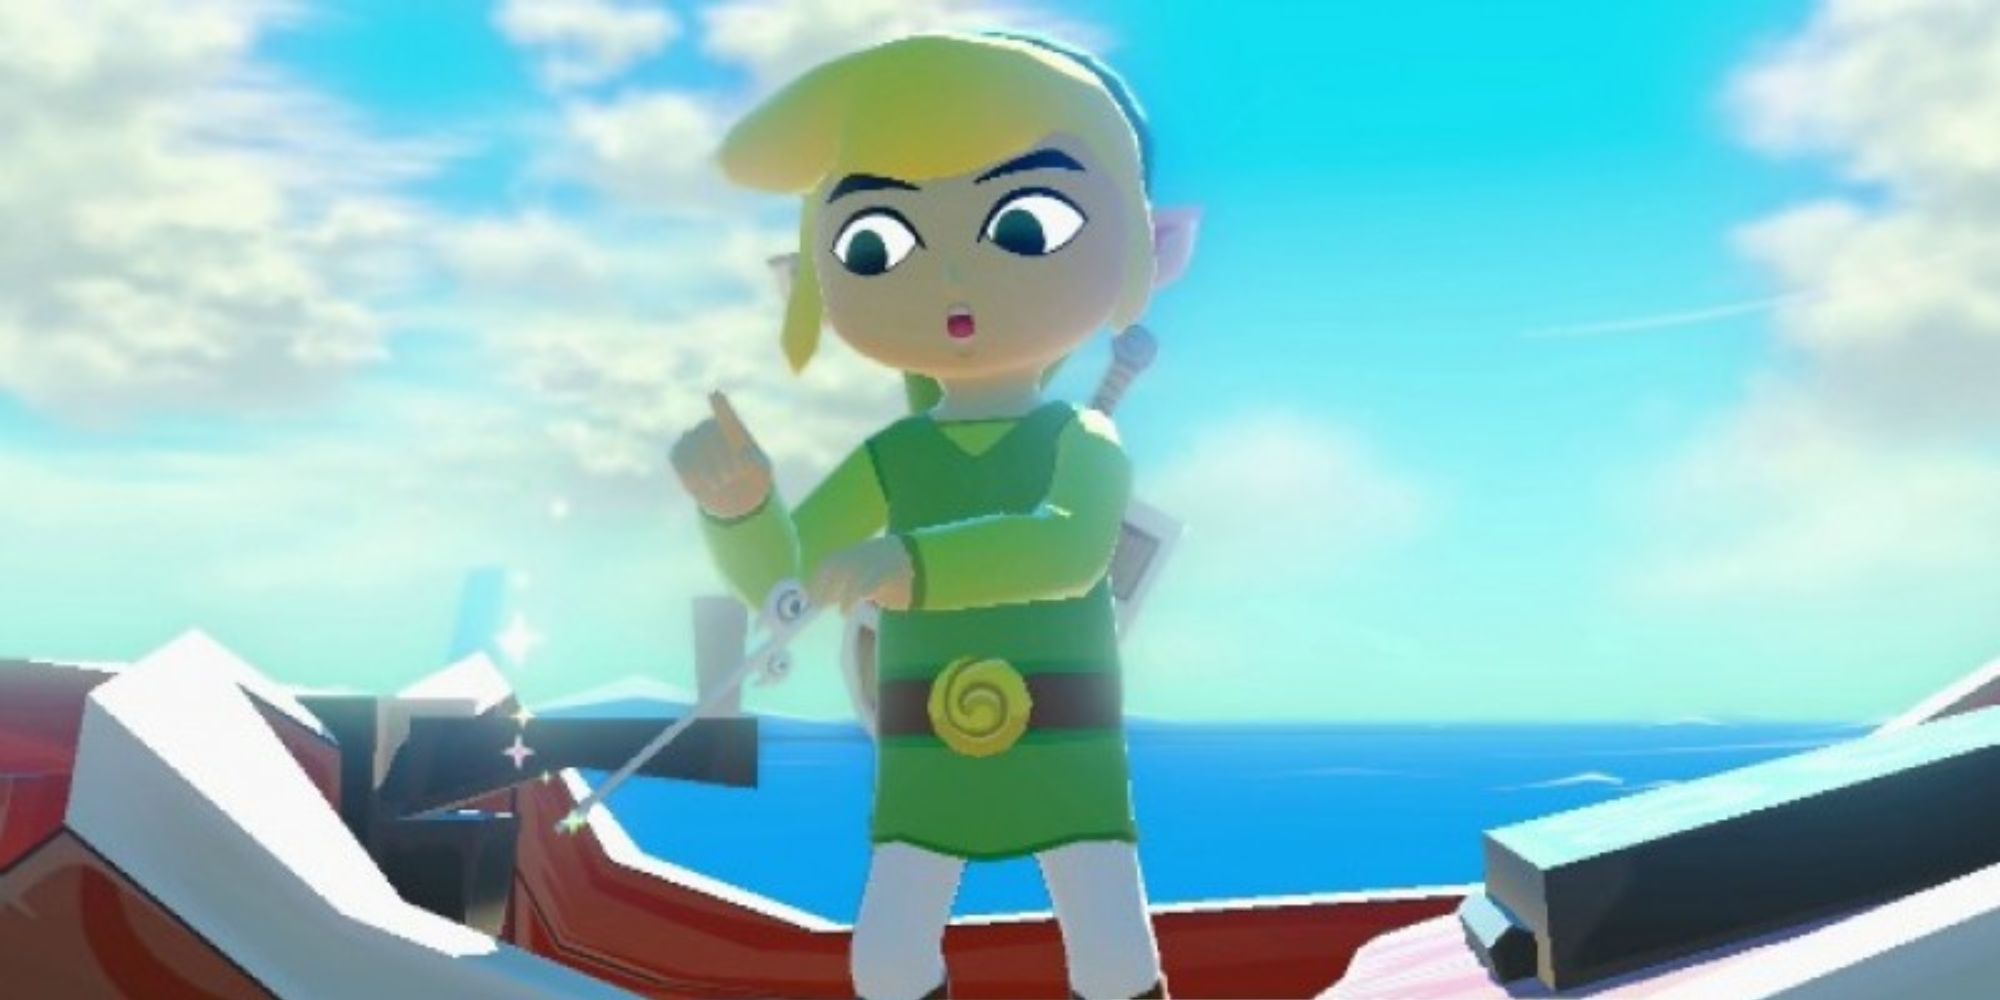 Toon Link holding the Wind Waker on a boat and looking surprised as sparkles fly out